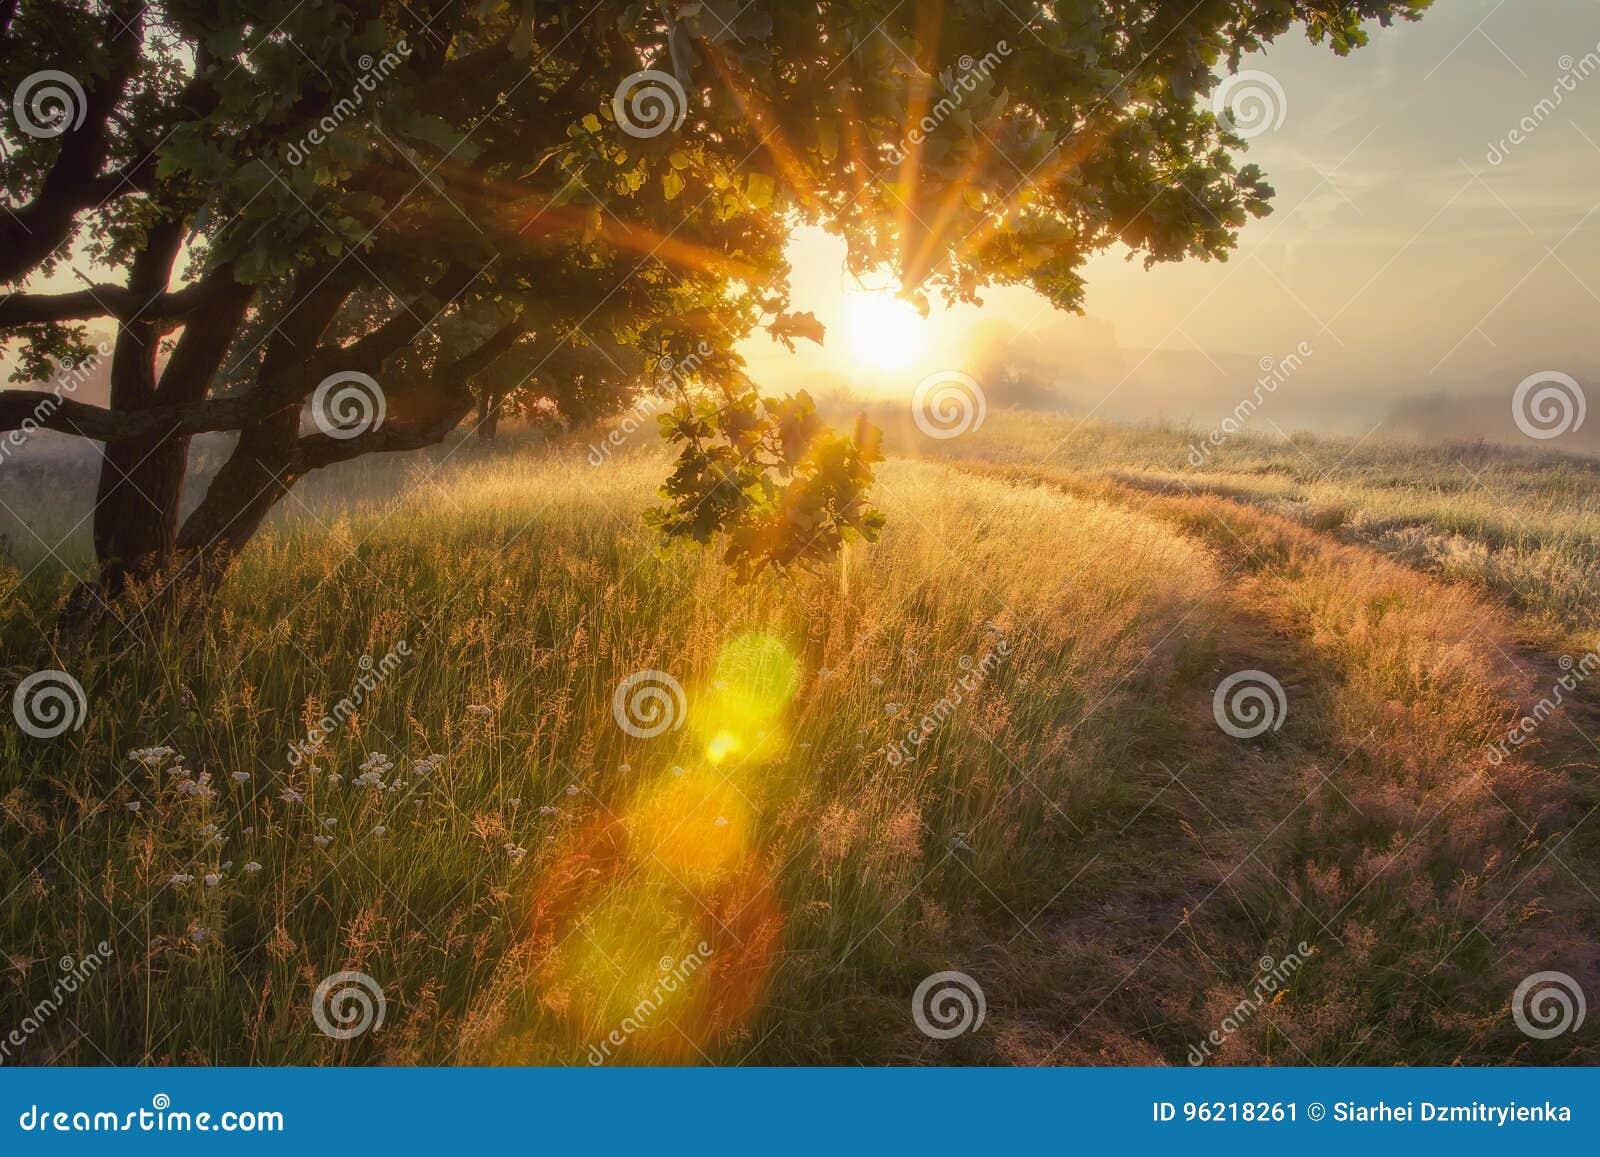 landscape rays of sun through branches of tree. early autumn on morning sunrise solar glare